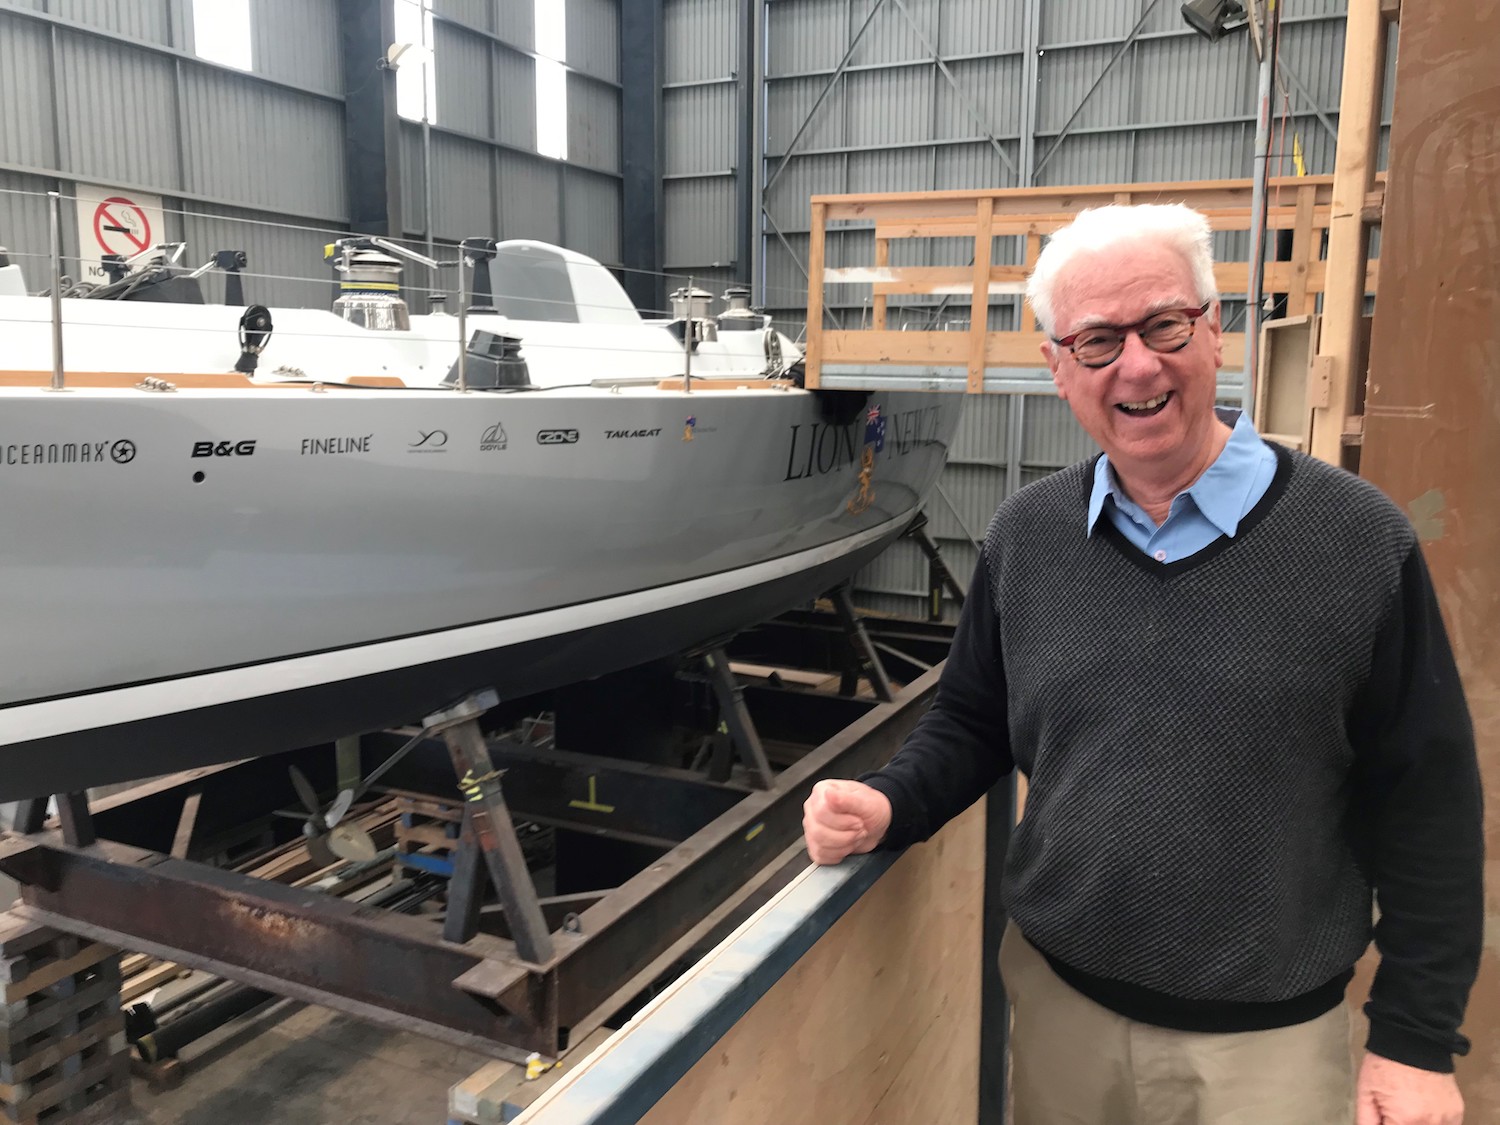 Ron Holland, designer of Lion NZ racing yacht, visits Yacht Developments facility to view refit process, Auckland New Zealand